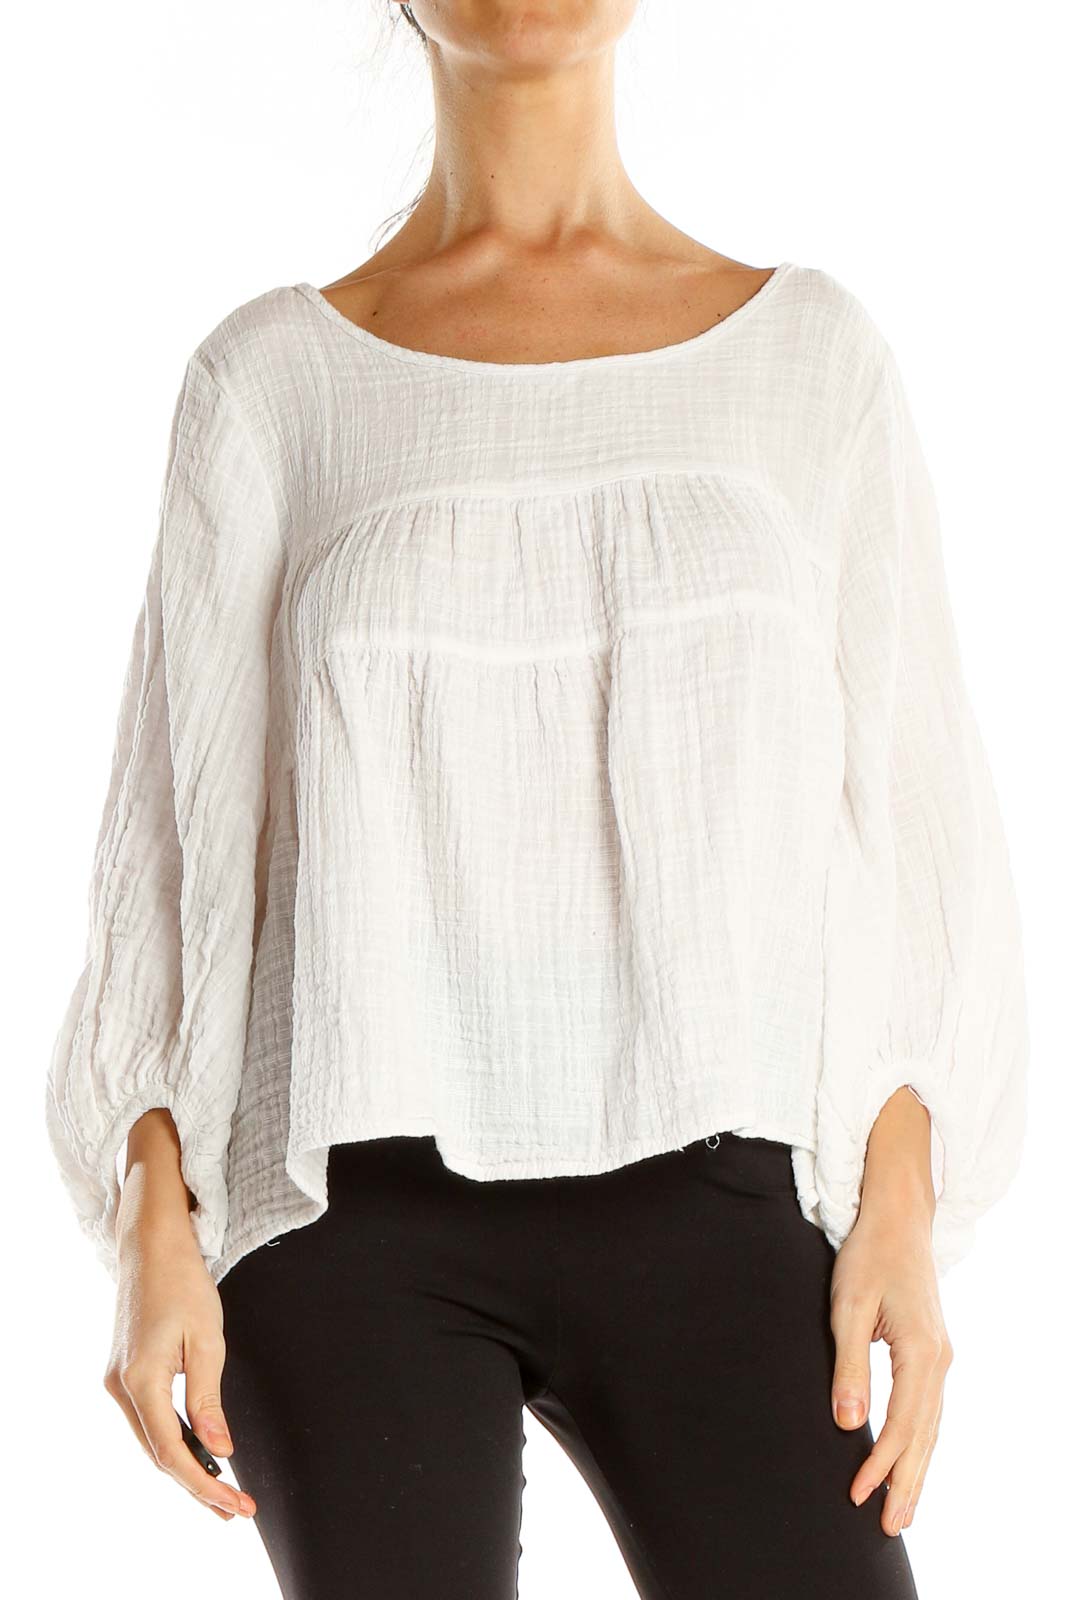 White Textured Chic Blouse Front